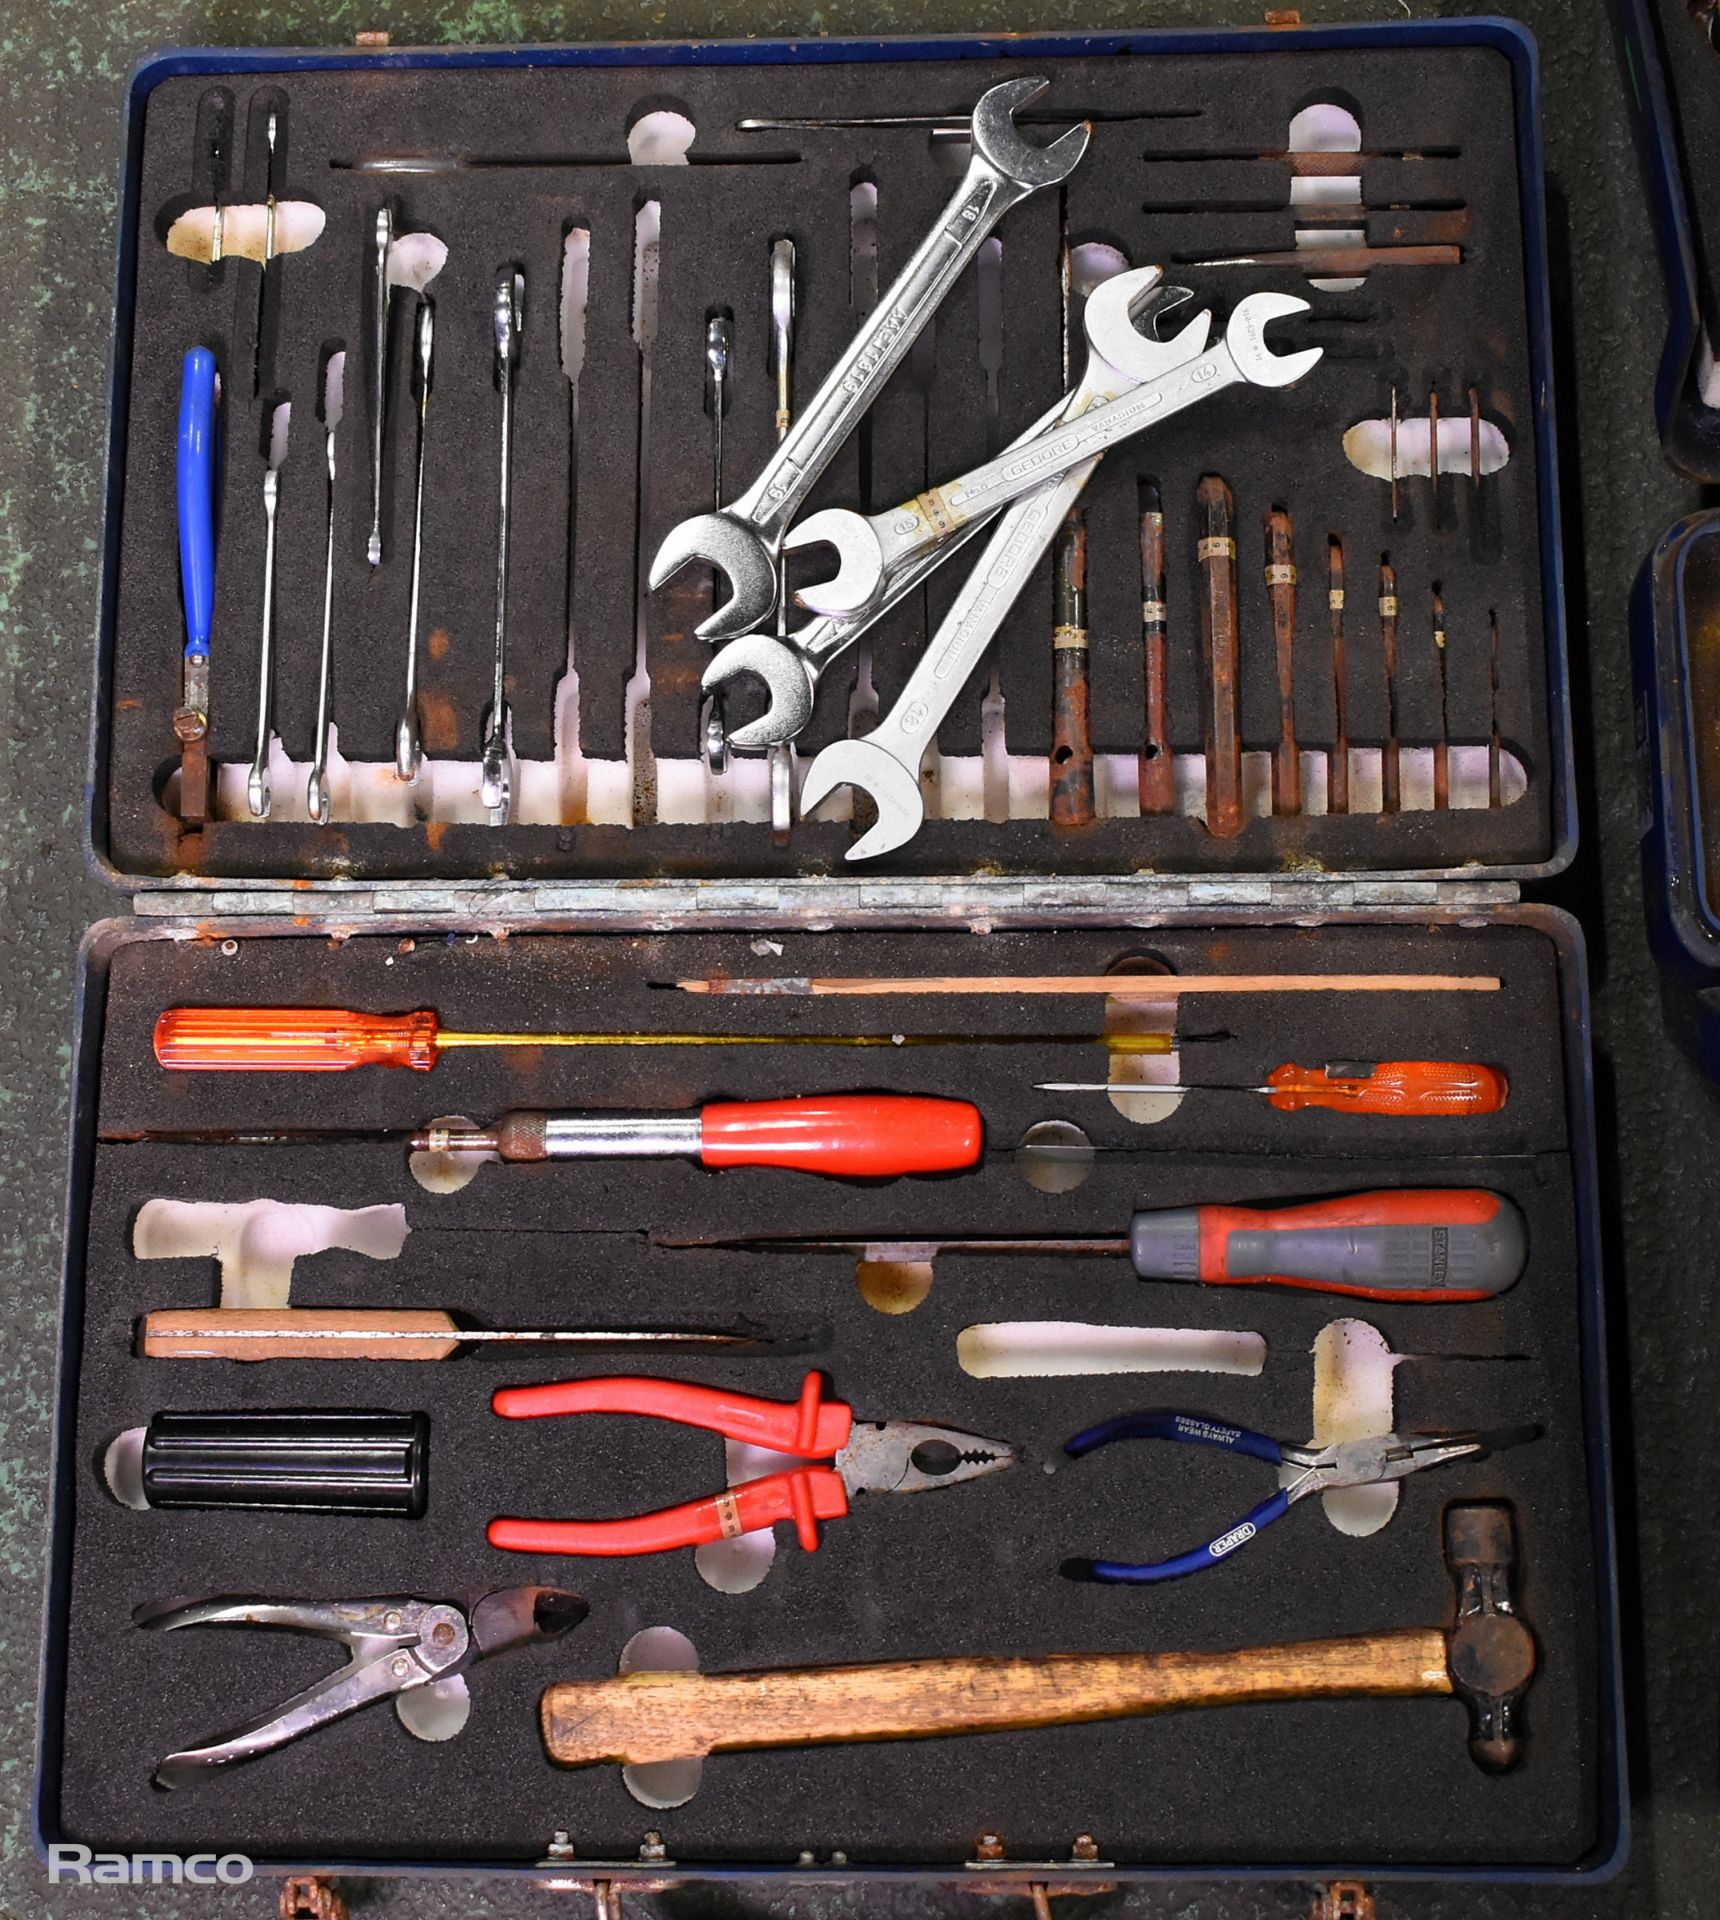 3x Multi piece tool kits in composite case - spanners, screwdrivers, hammer and punches - Image 2 of 7